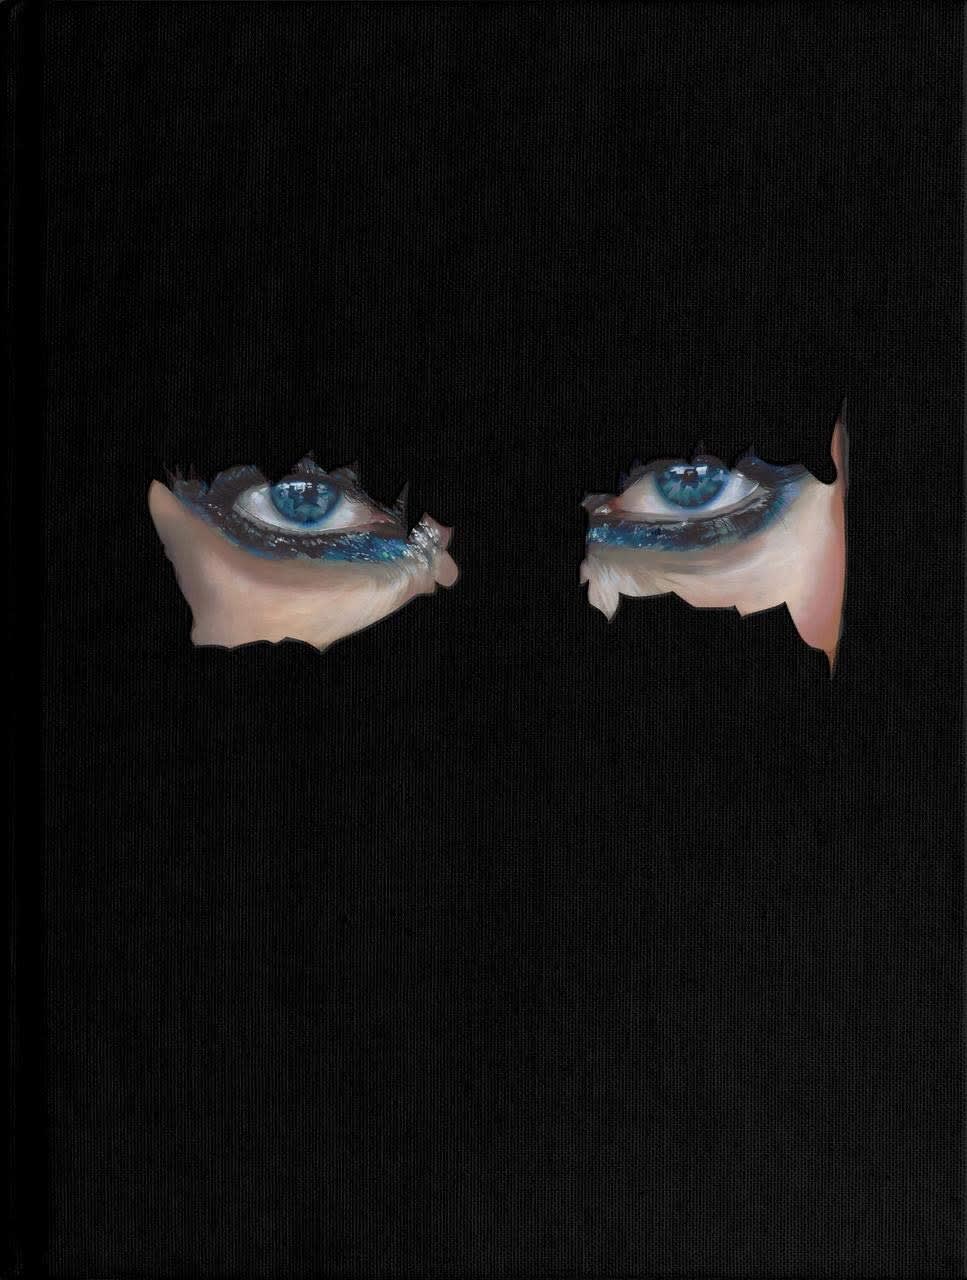 Cover of Sandra Chevrier's featuring a pair of eyes on a black background